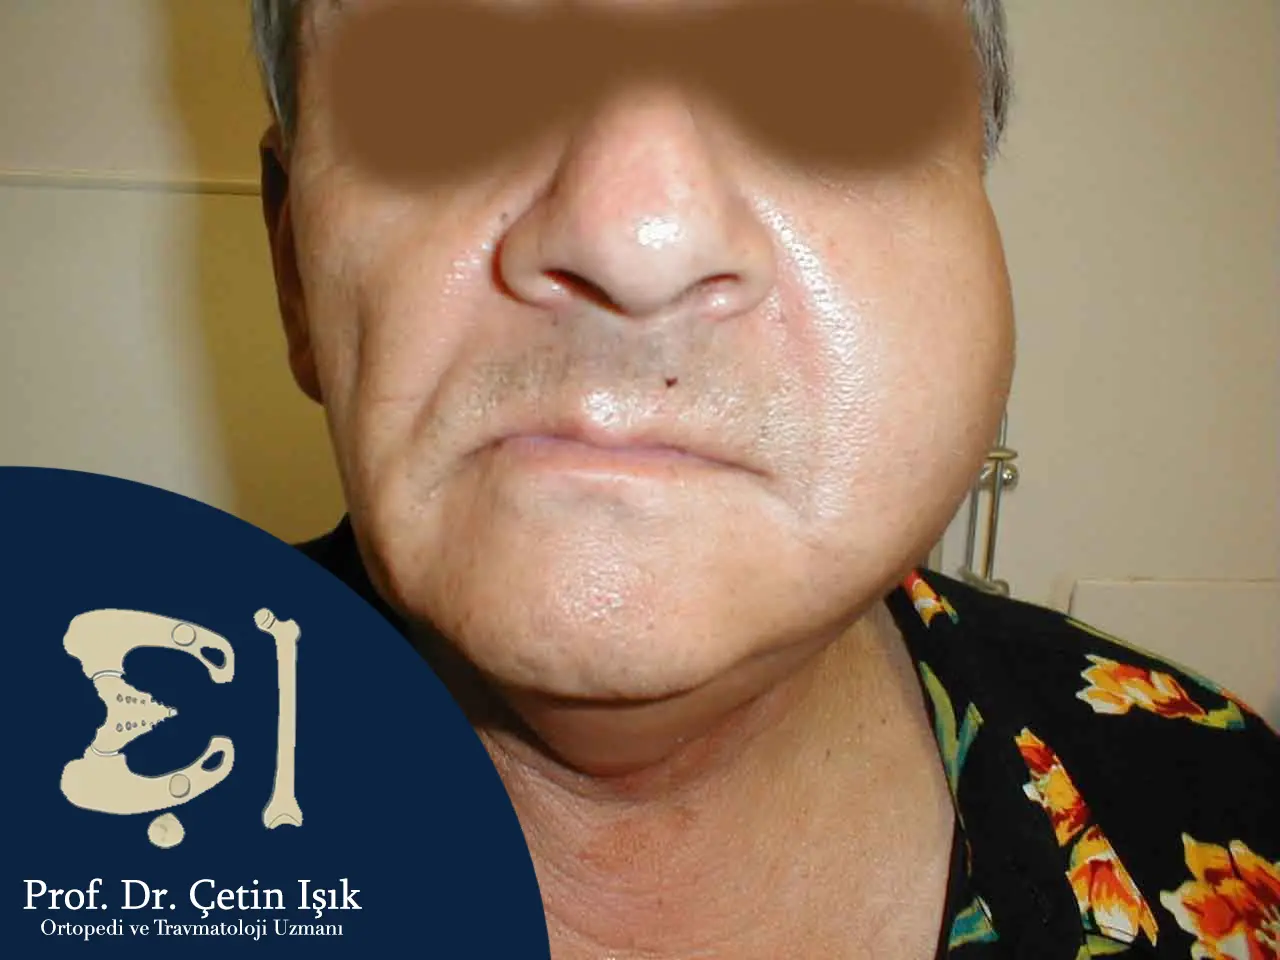 An image showing the enlargement of the parotid gland, which is detected by clinical examination and which follows infection with the mumps virus